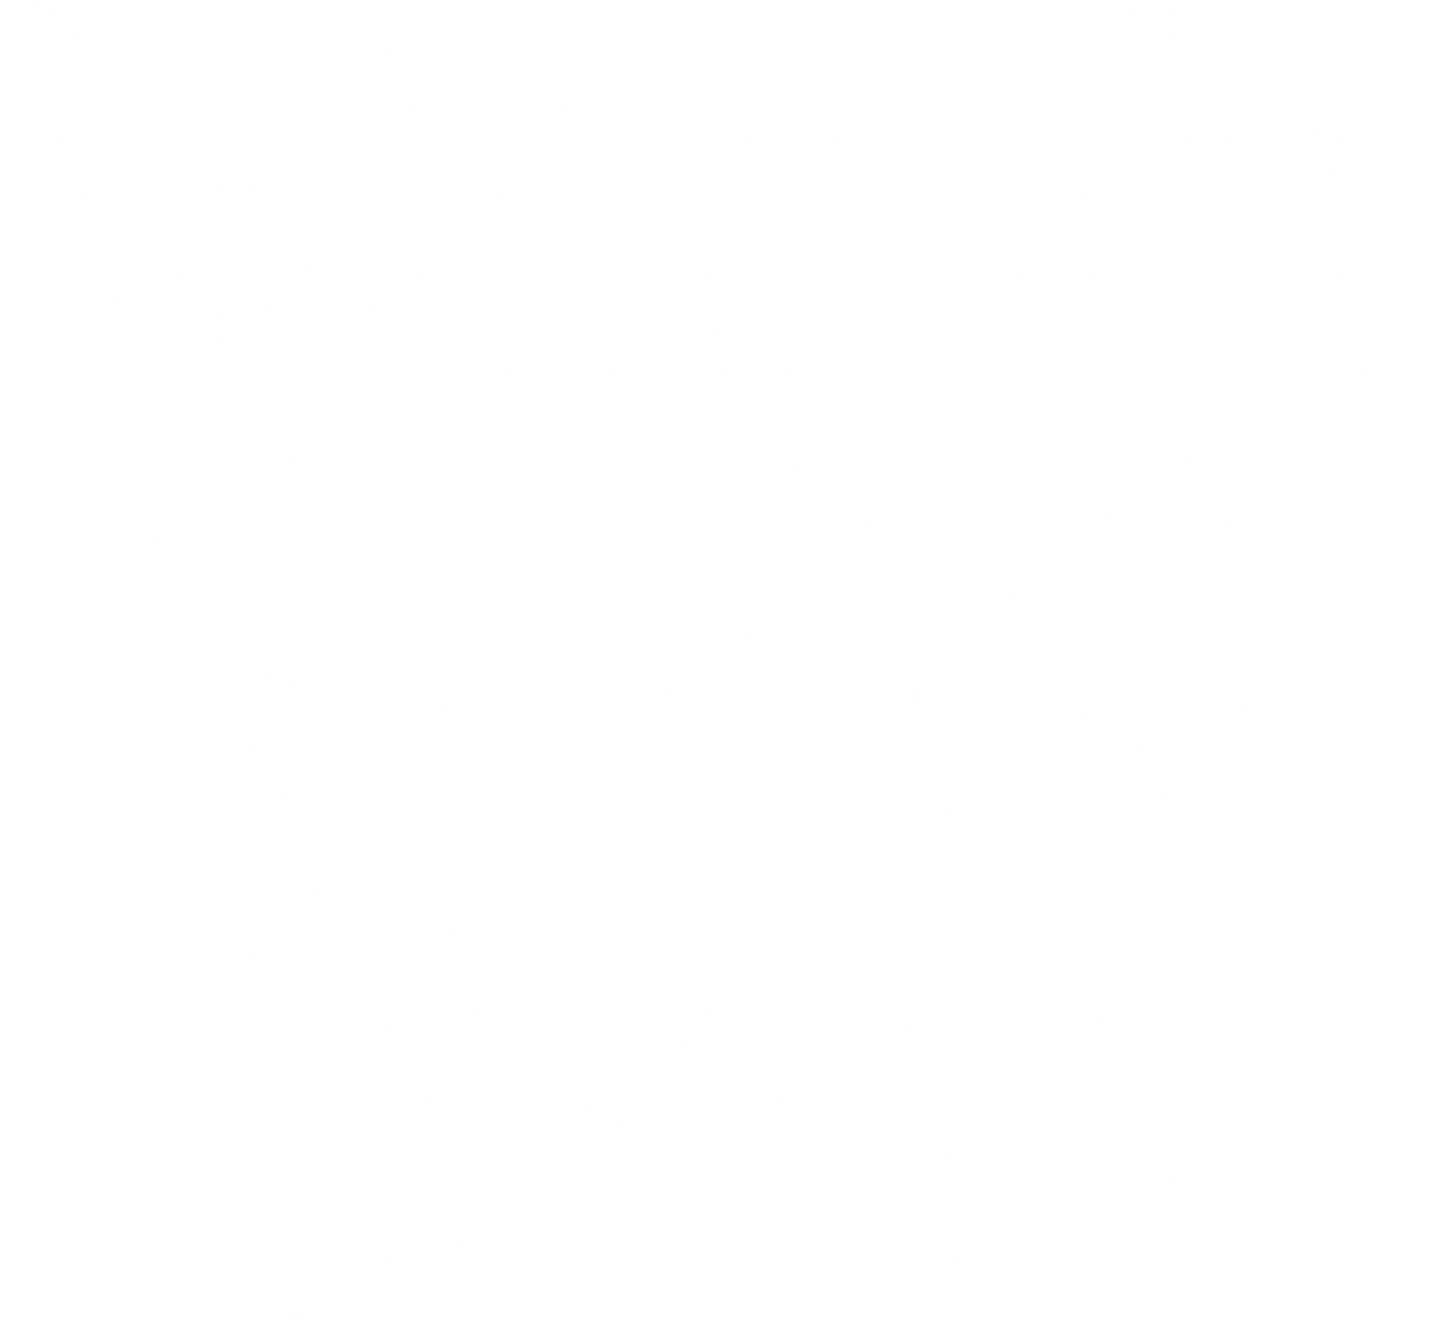 You are Exactly, Where you are Supposed to be Because you make Bad Decisions